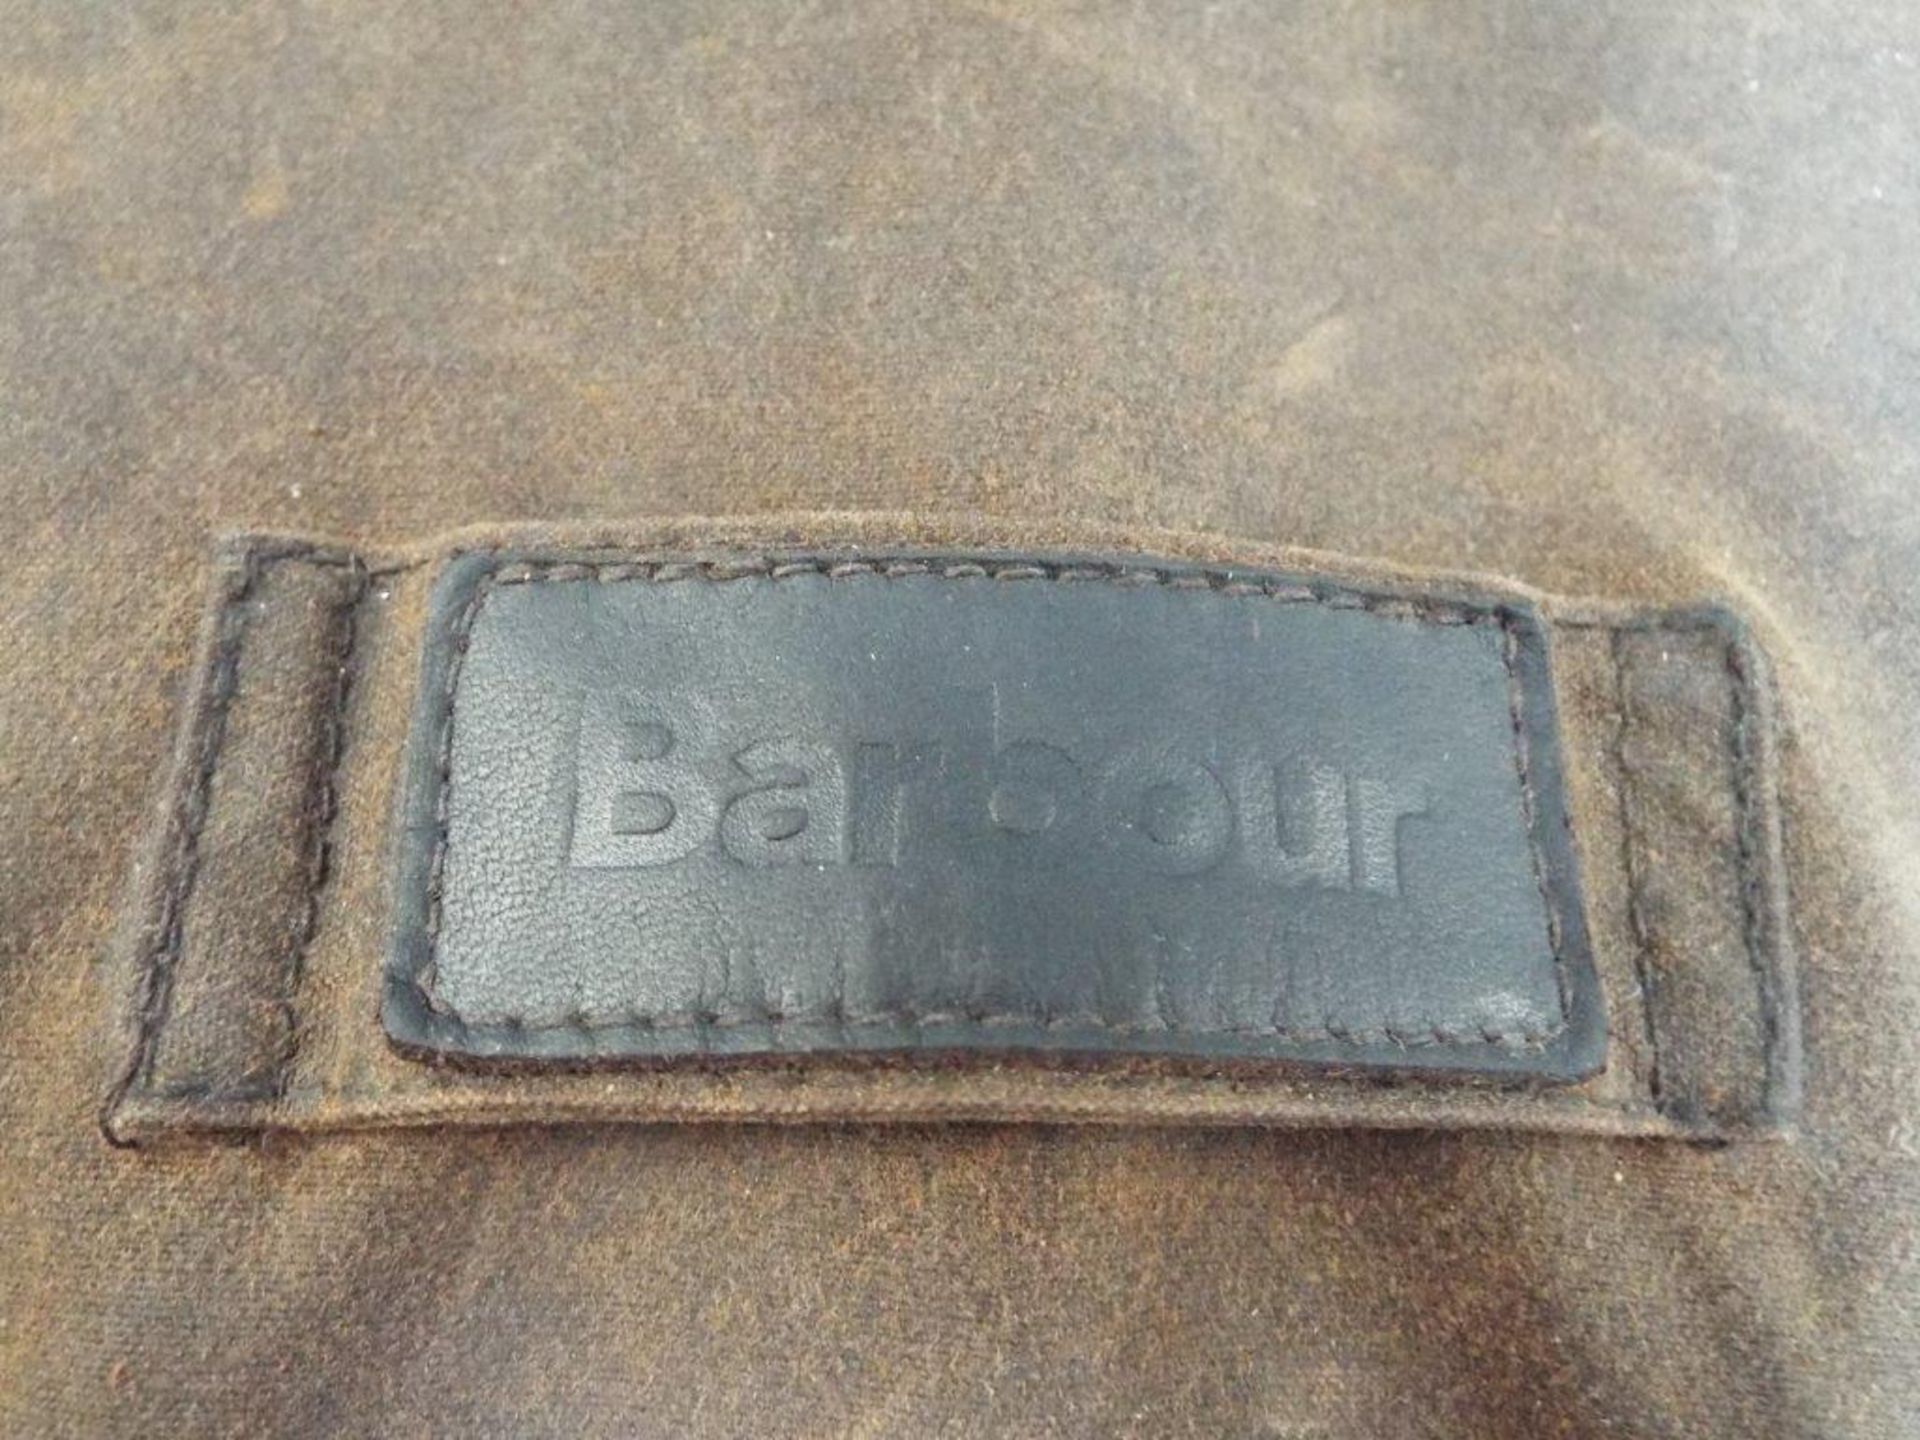 Barbour A1550 Huntsman Waxed Jacket, Size L - Image 7 of 12